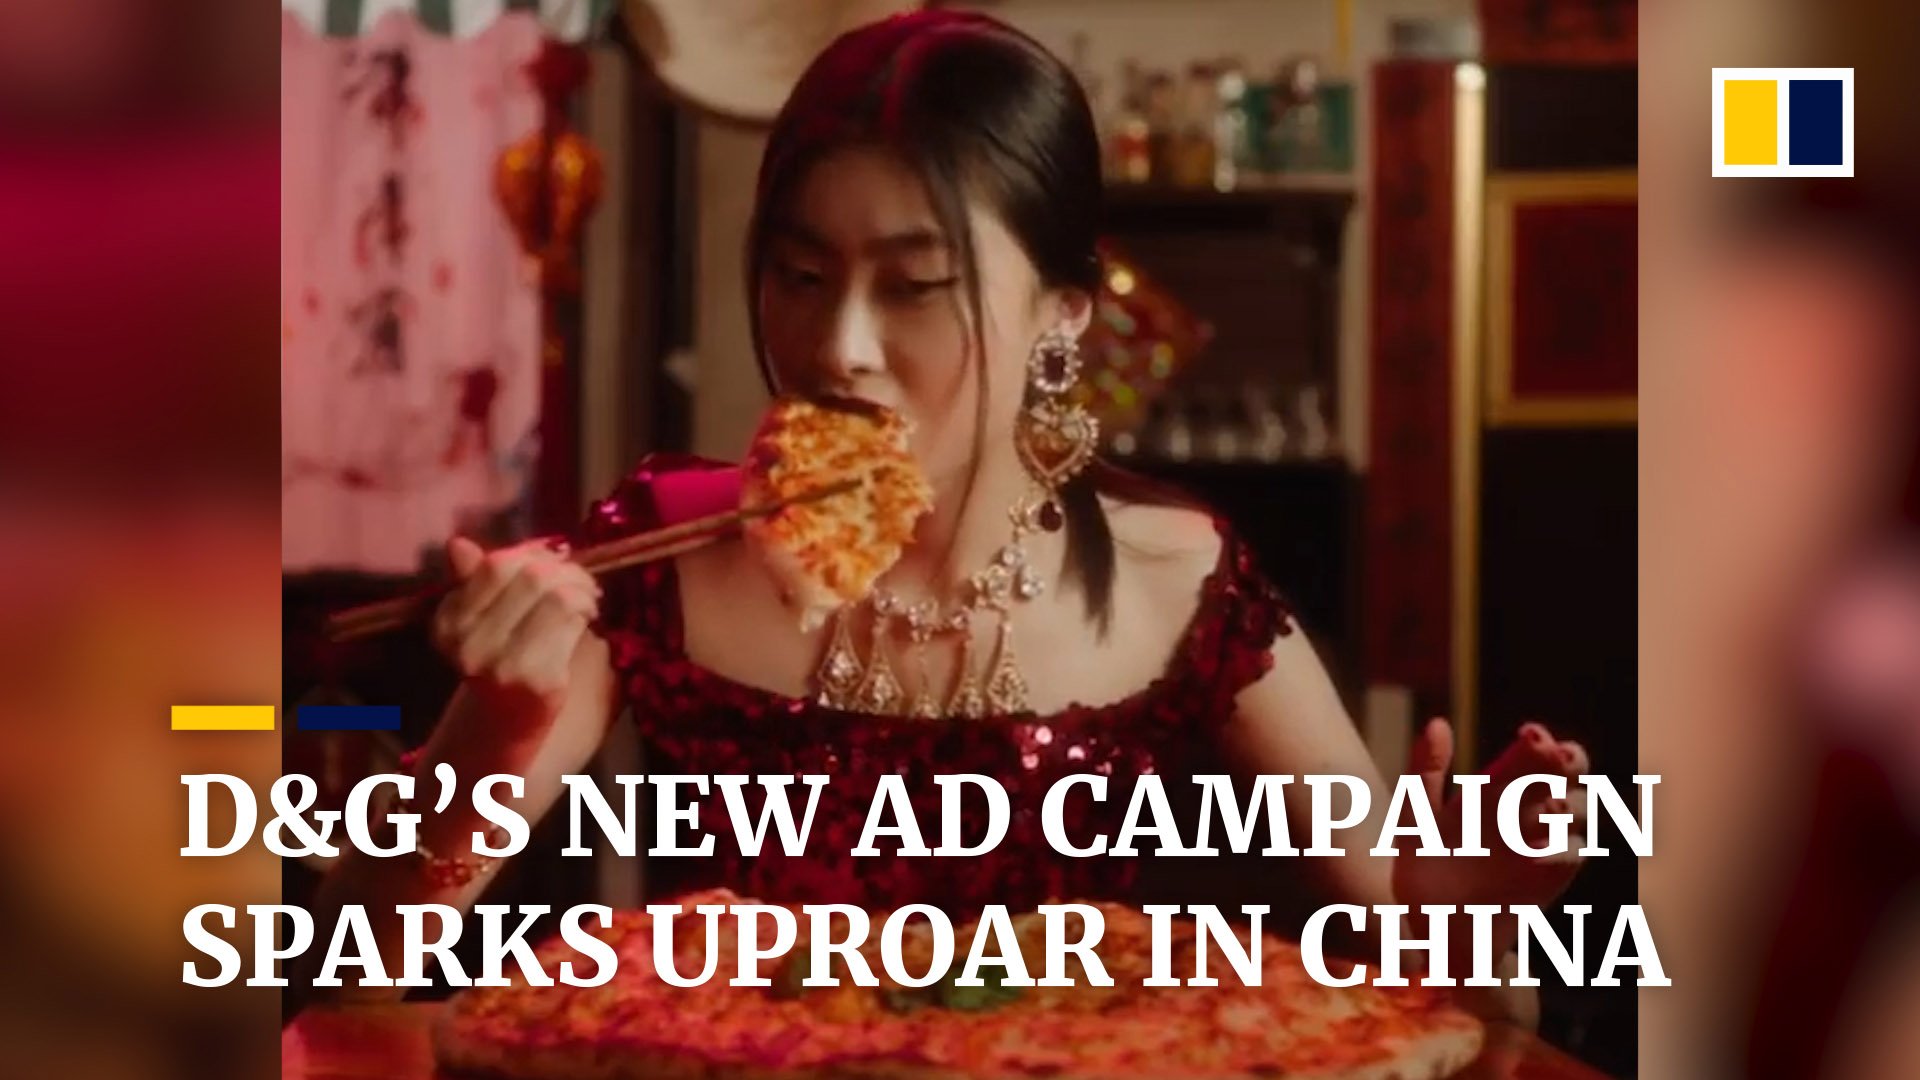 Dolce & Gabbana advert completely ruined my career, says Chinese